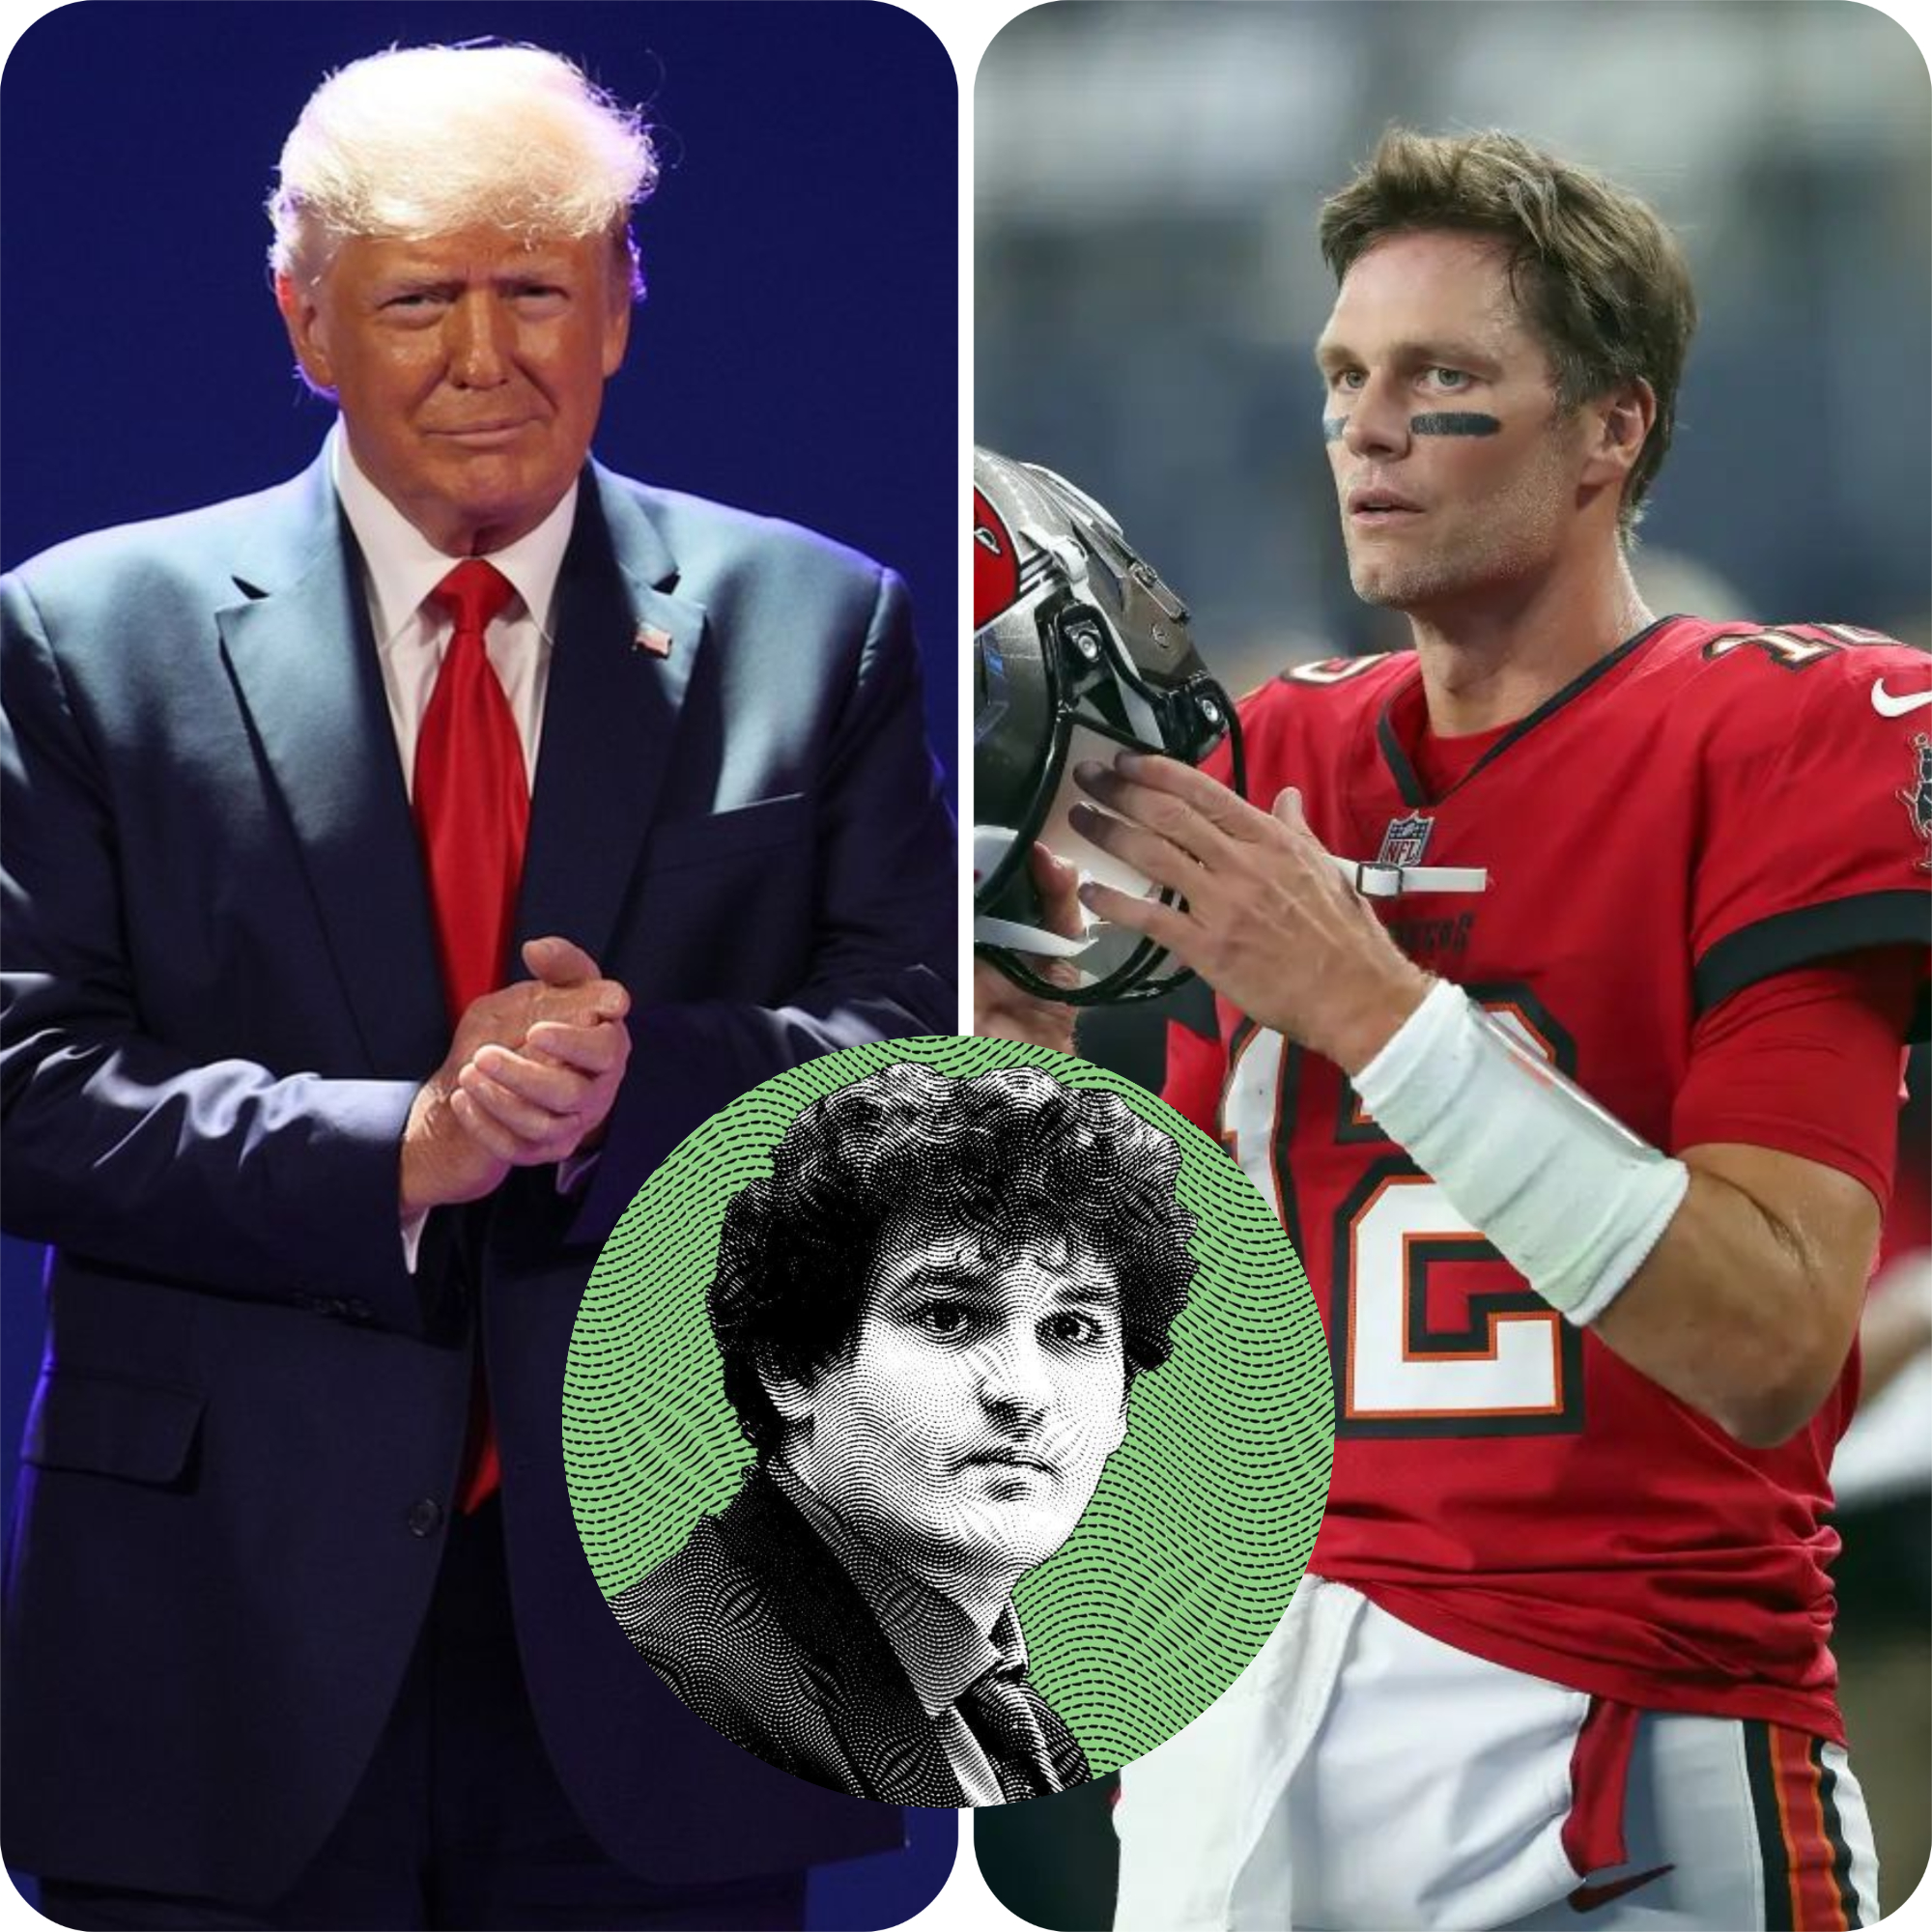 Sam Bankman-Fried Plots to Replace Trump with Tom Brady in 2024 Presidential Race